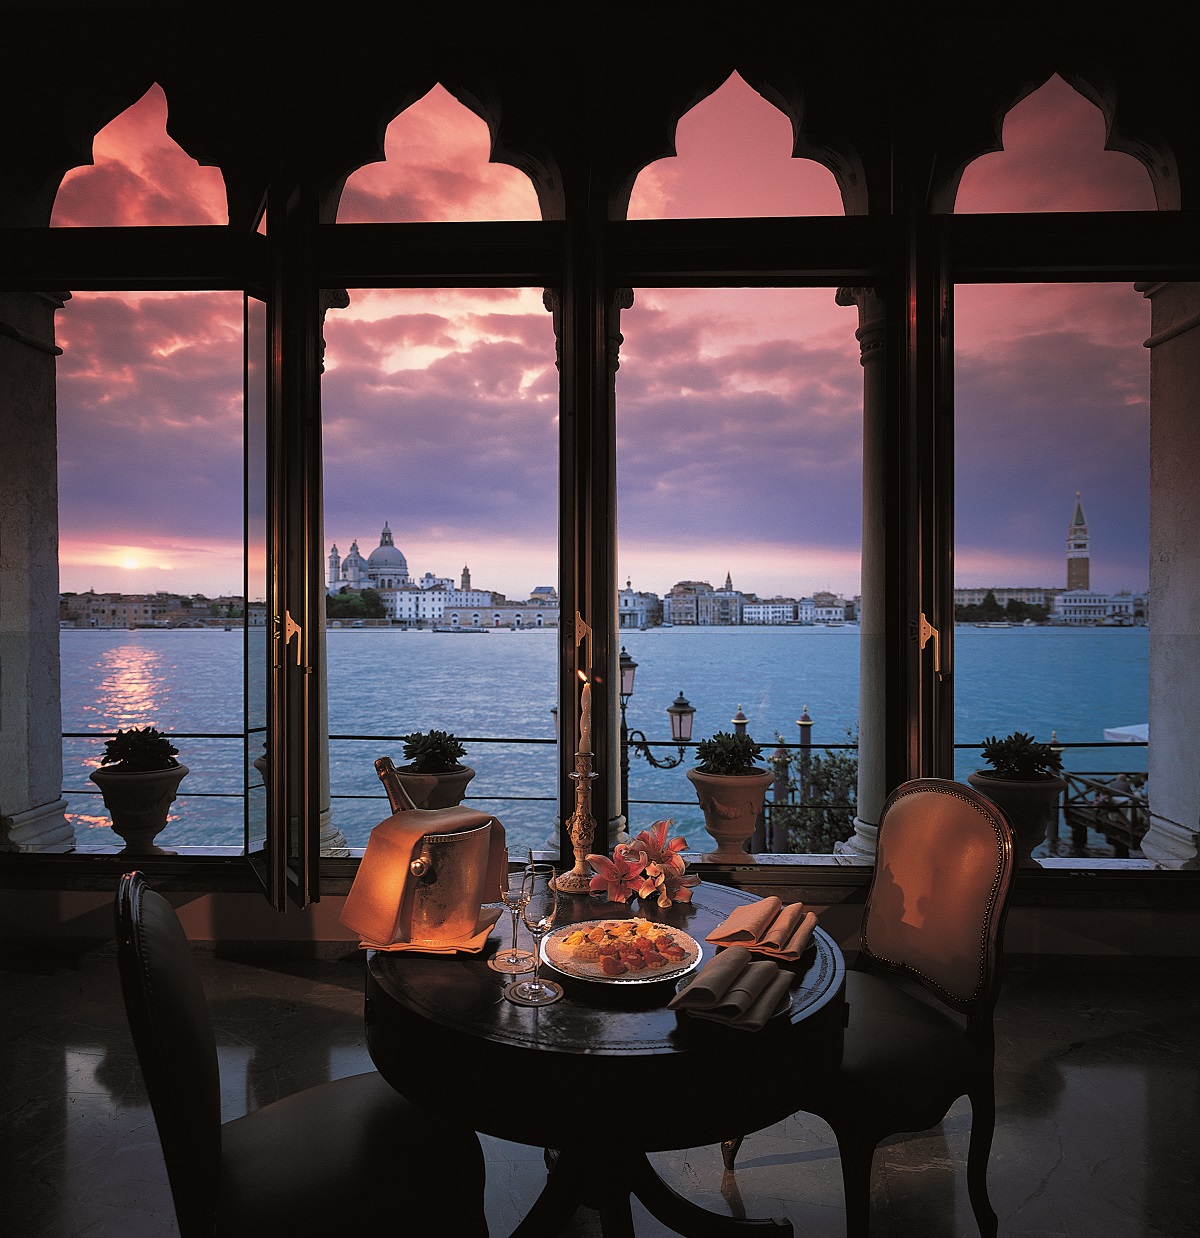 Live Like a King and Queen in a Venetian Palazzo